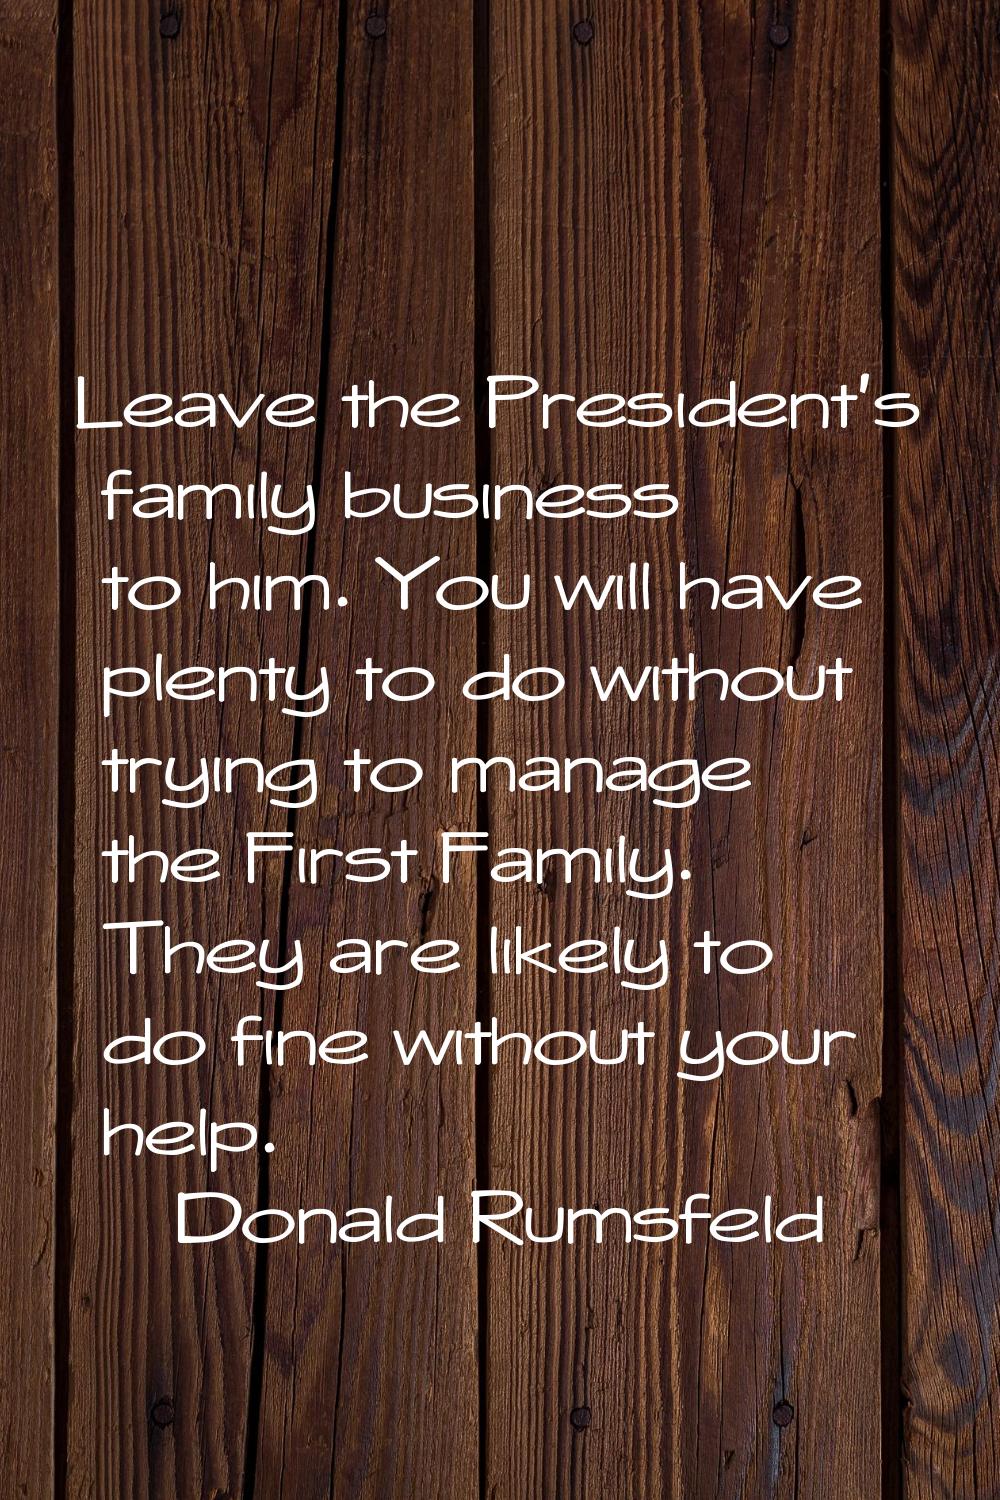 Leave the President's family business to him. You will have plenty to do without trying to manage t